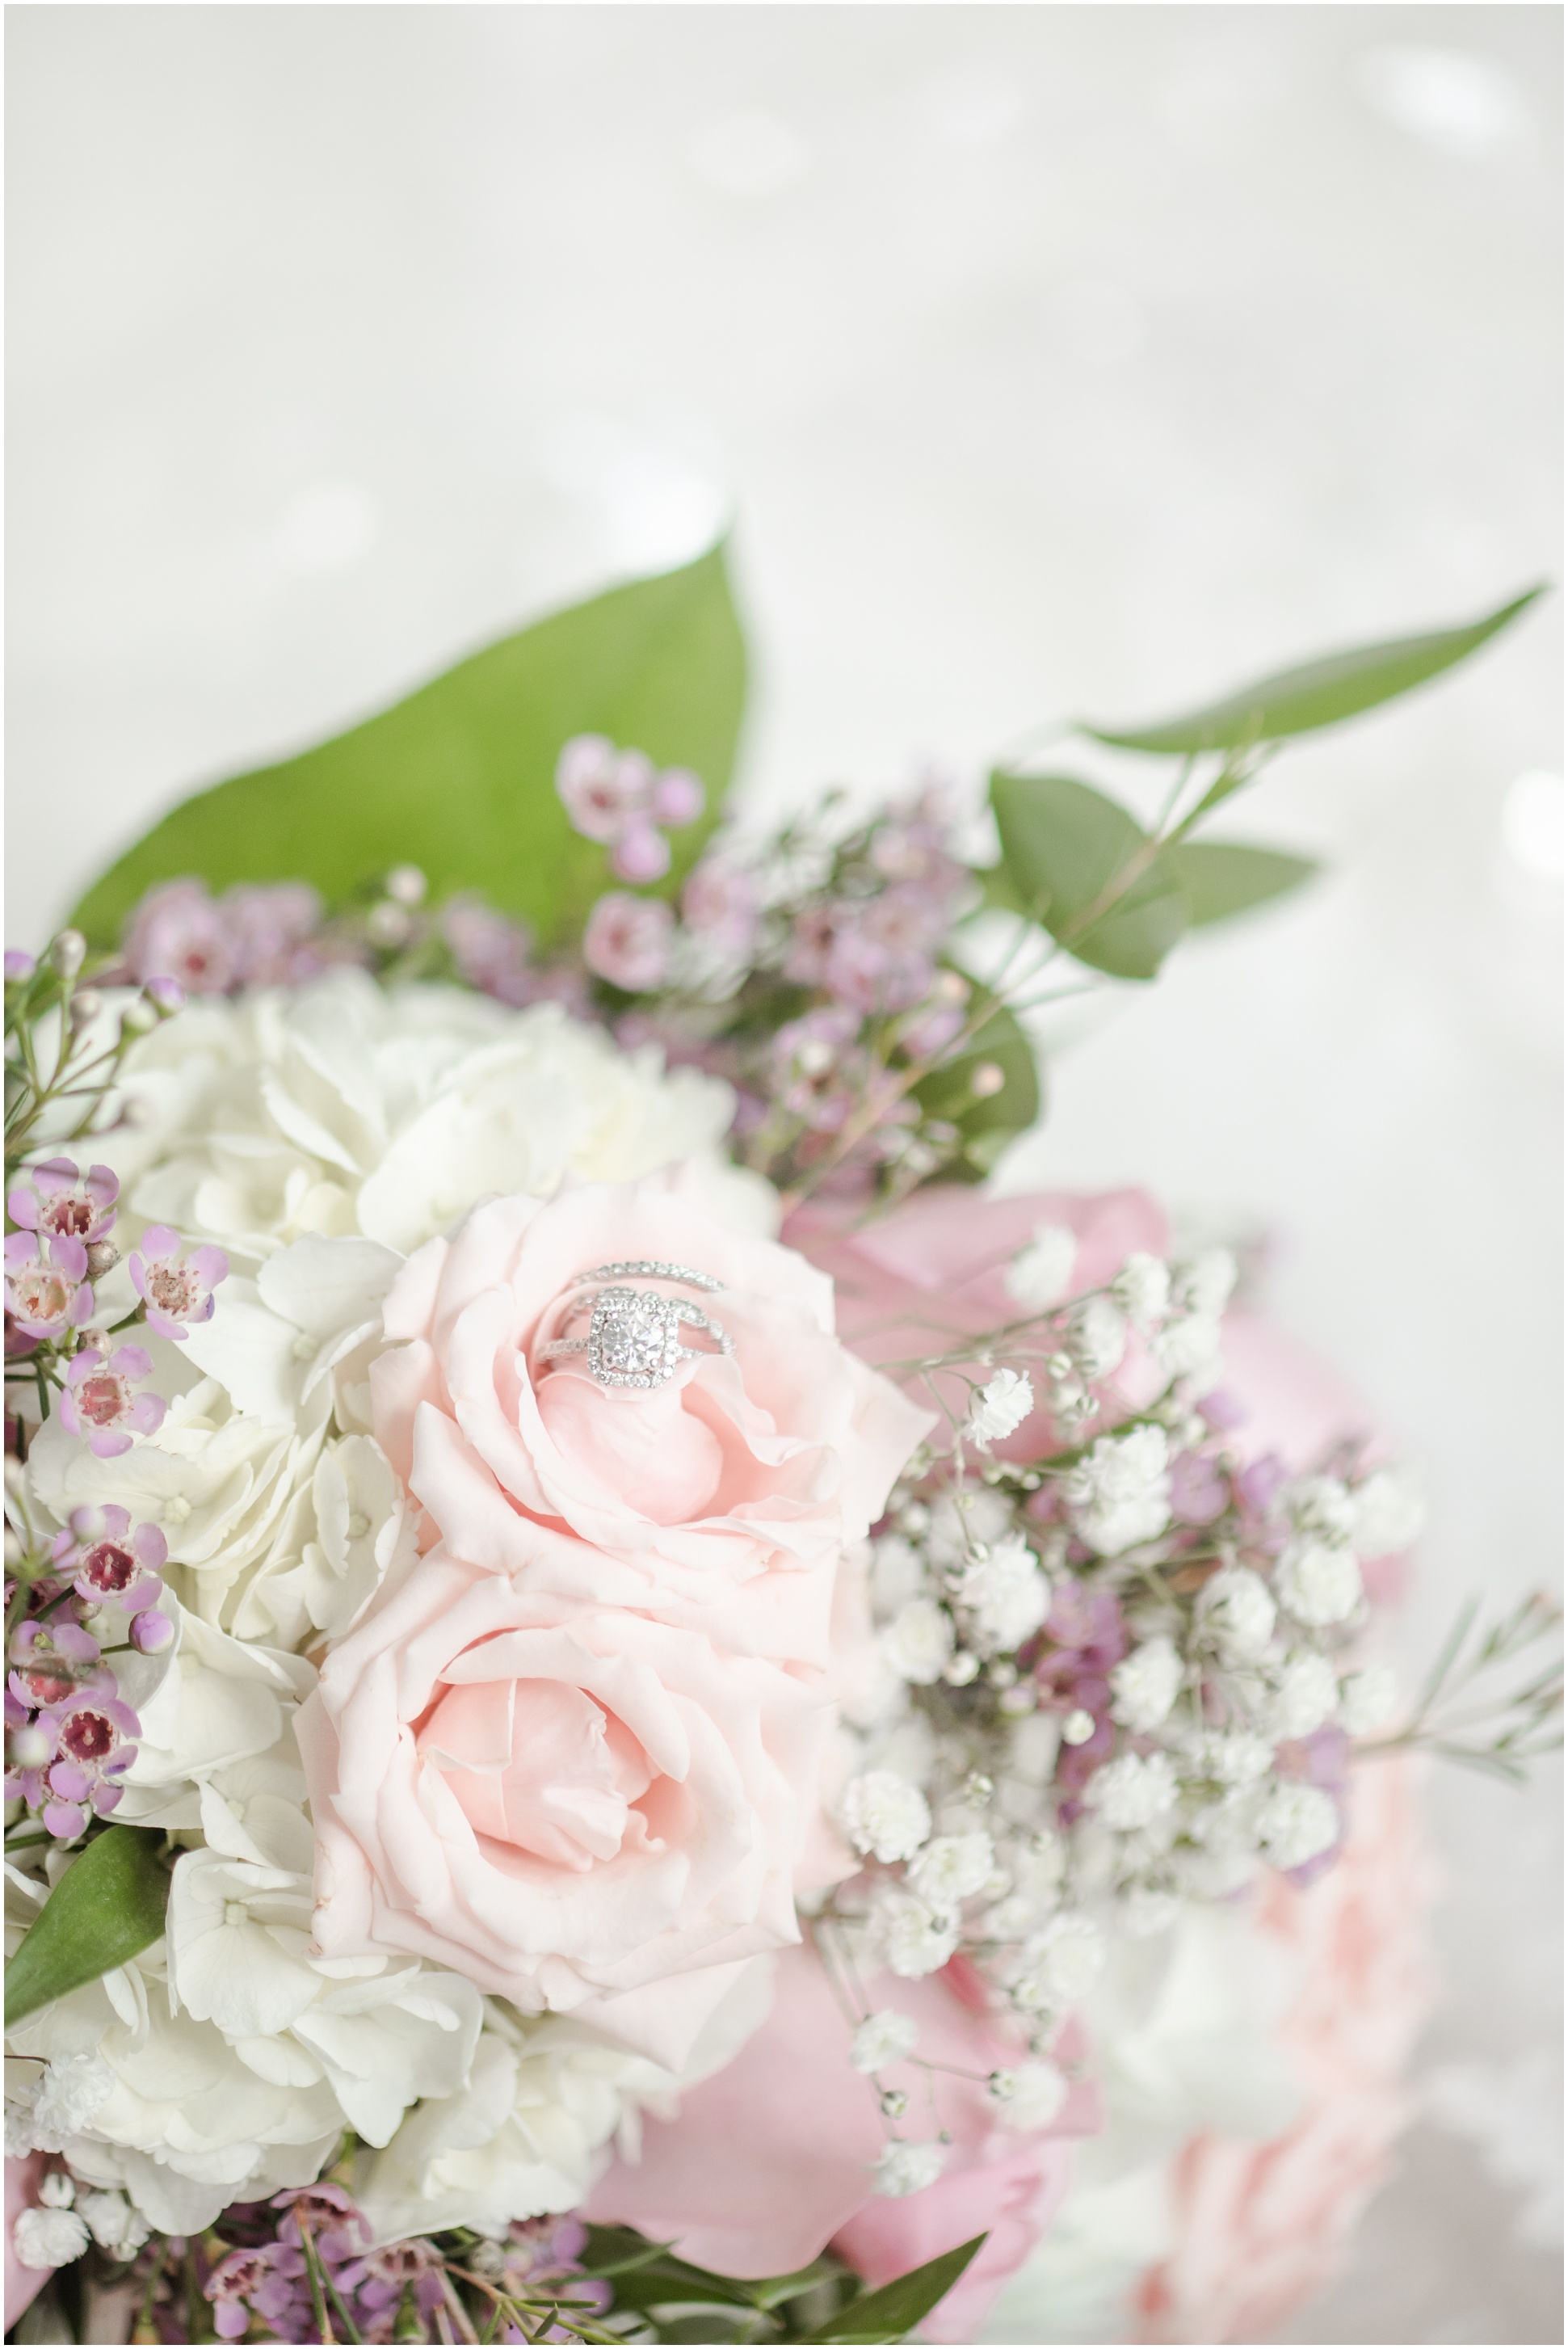 The rings in a blush floral bouquet